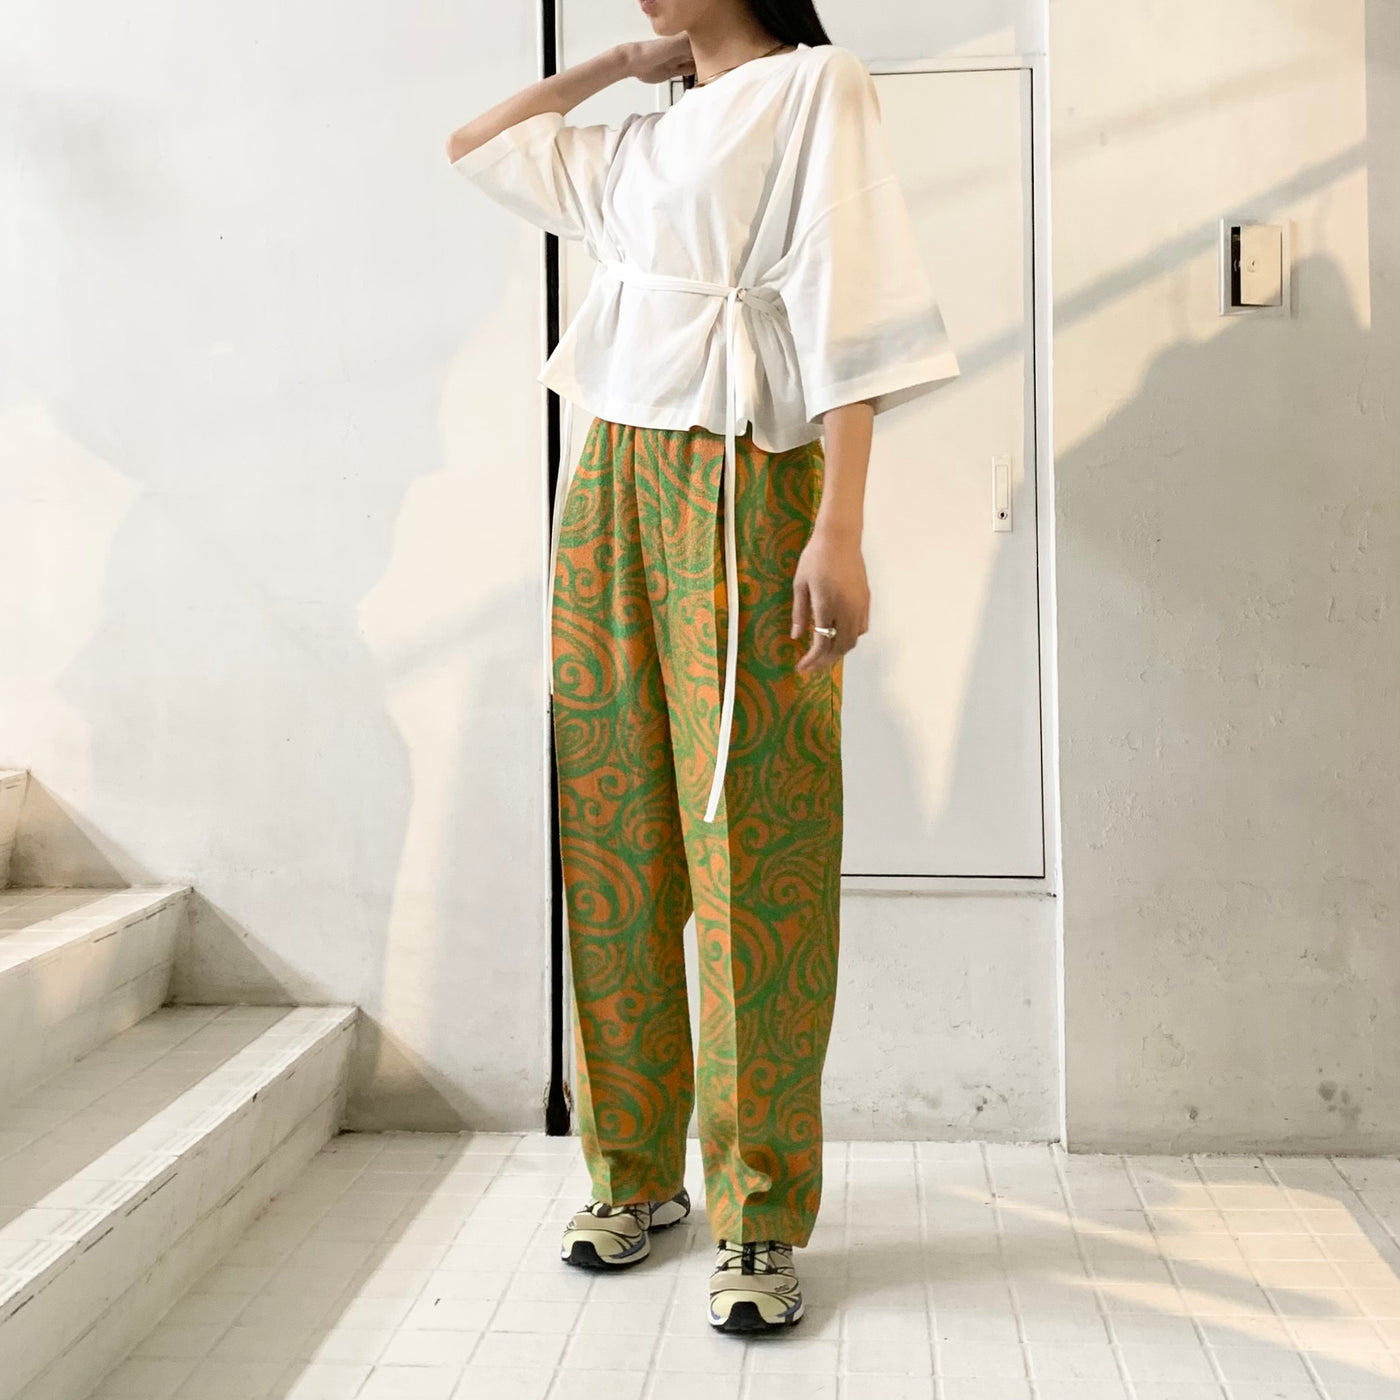 【INSCRIRE】 Belted Wide Tee  / Big Paisley Pants